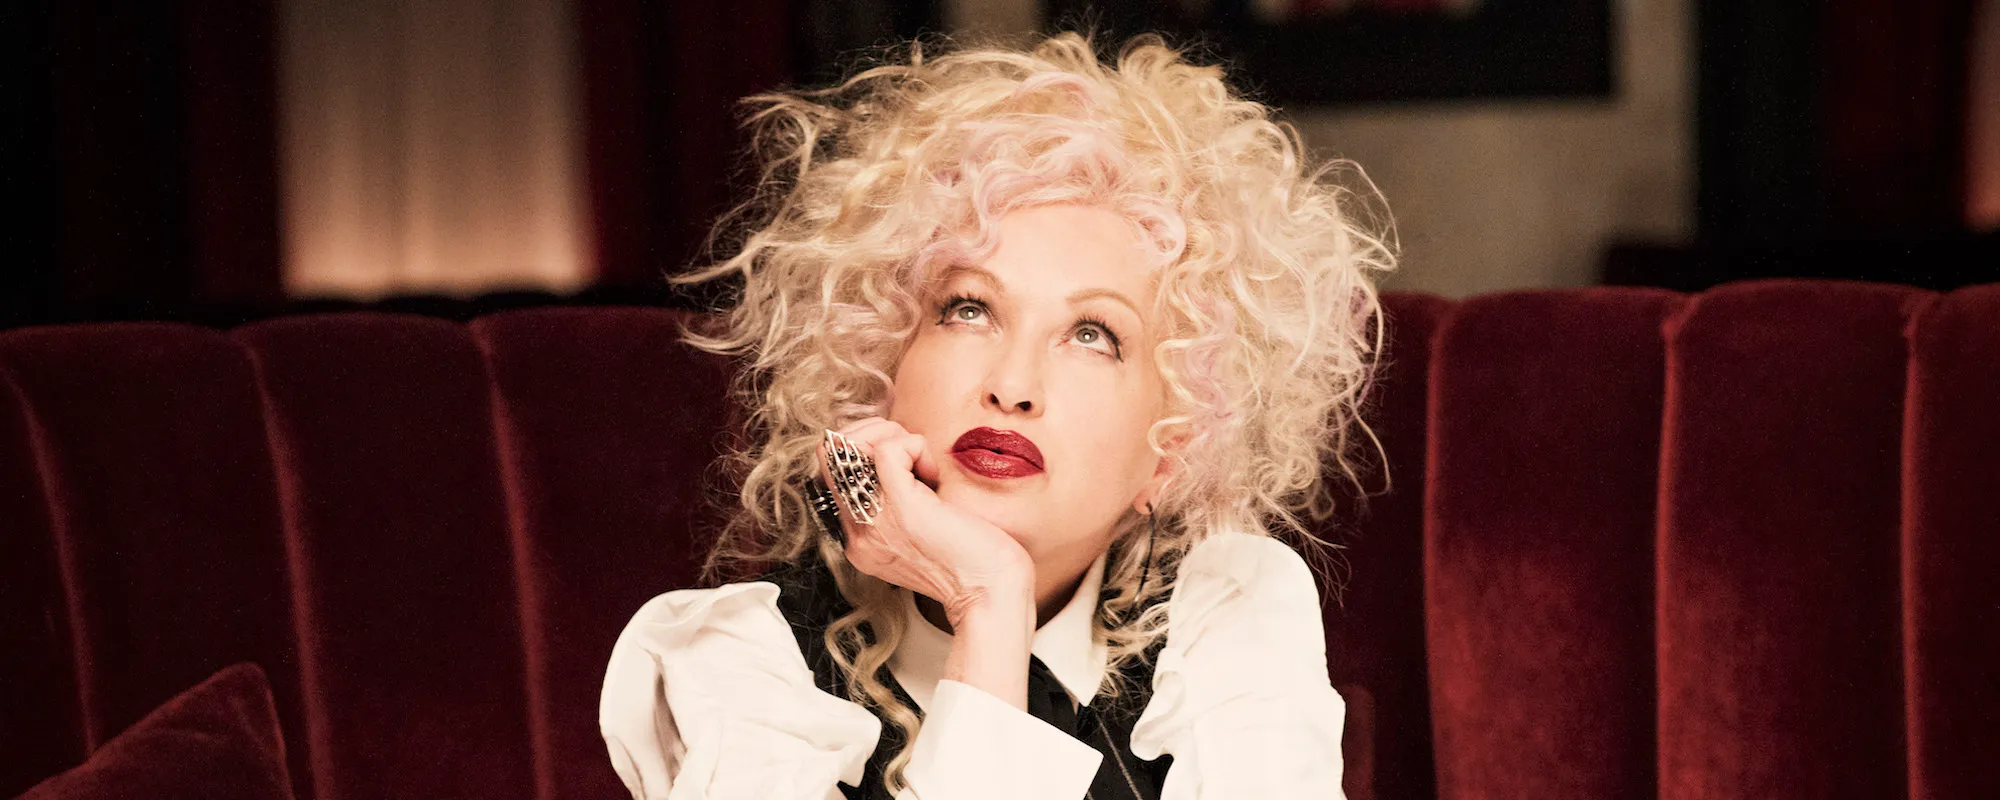 Lennon Stella, Madison Rose Deliver Cyndi Lauper Covers in Honor of Icon’s Birthday